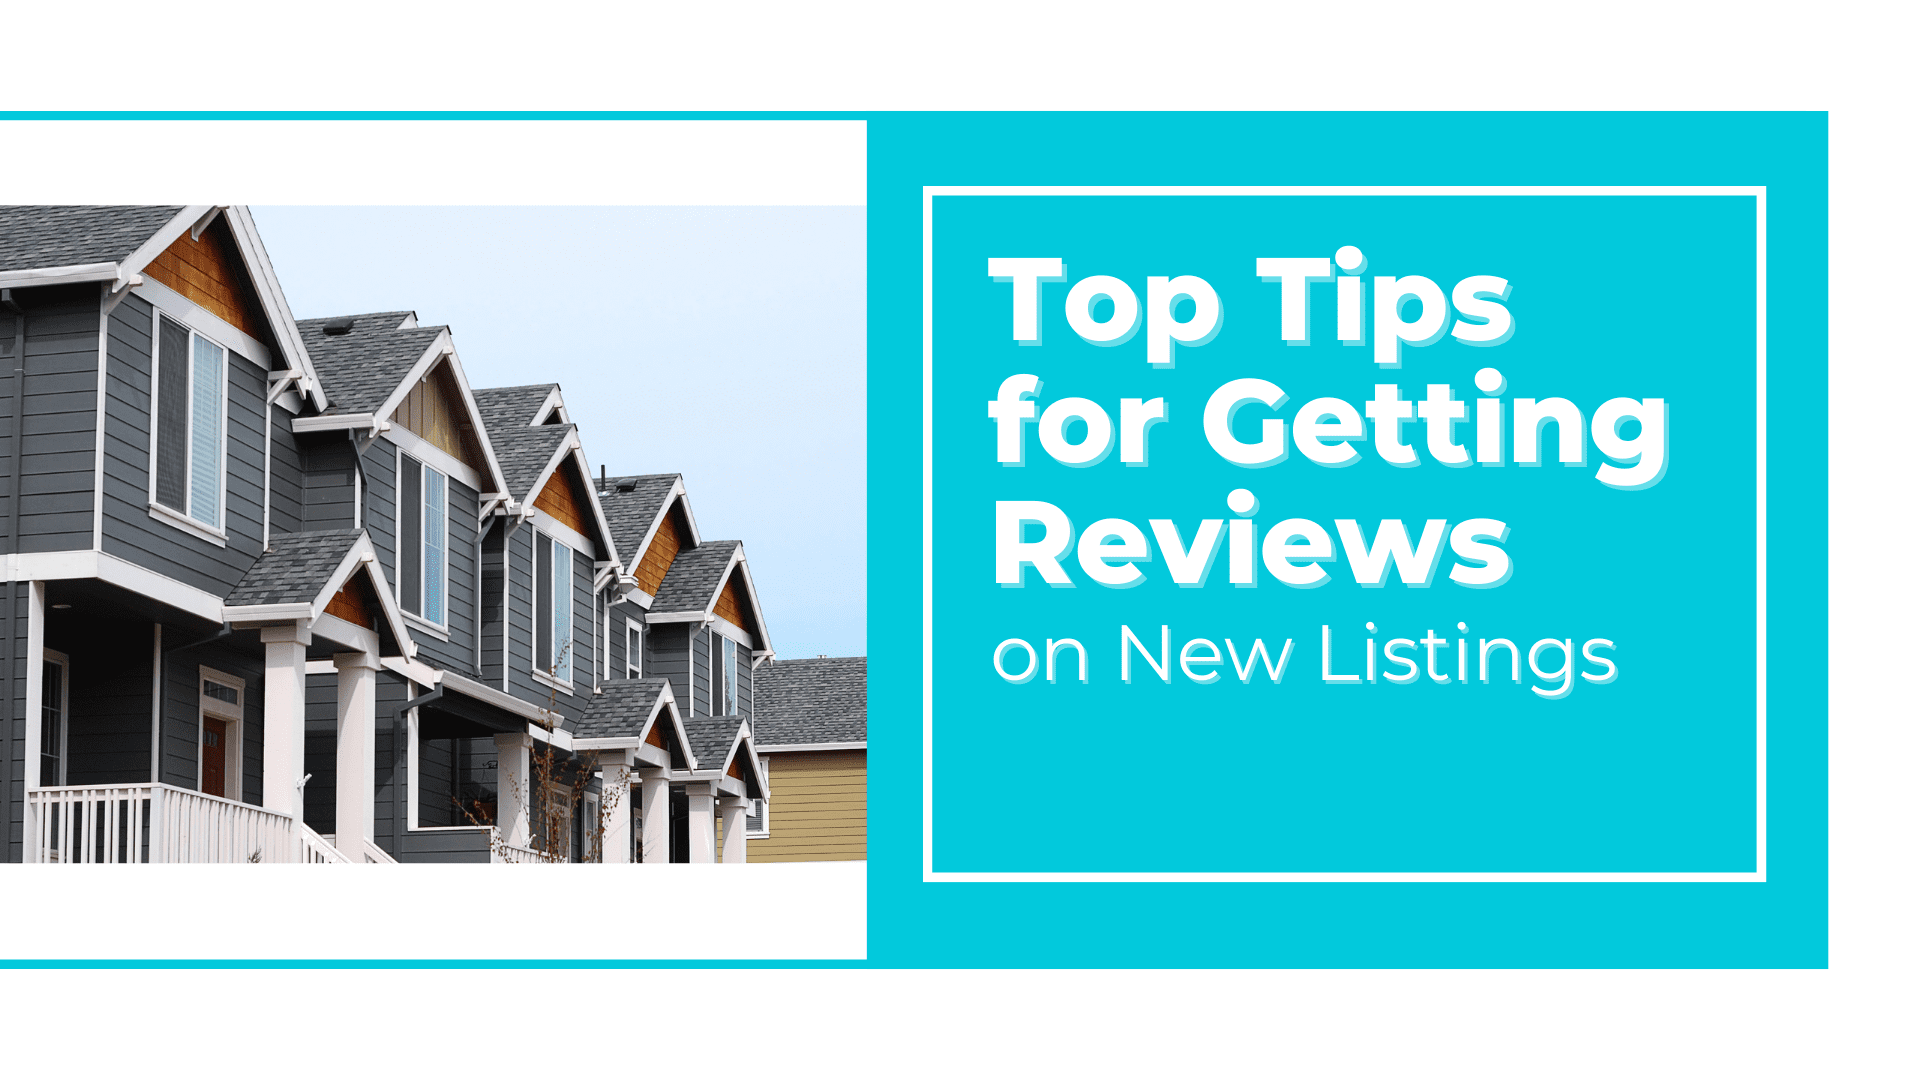 Top Tips for Getting Reviews